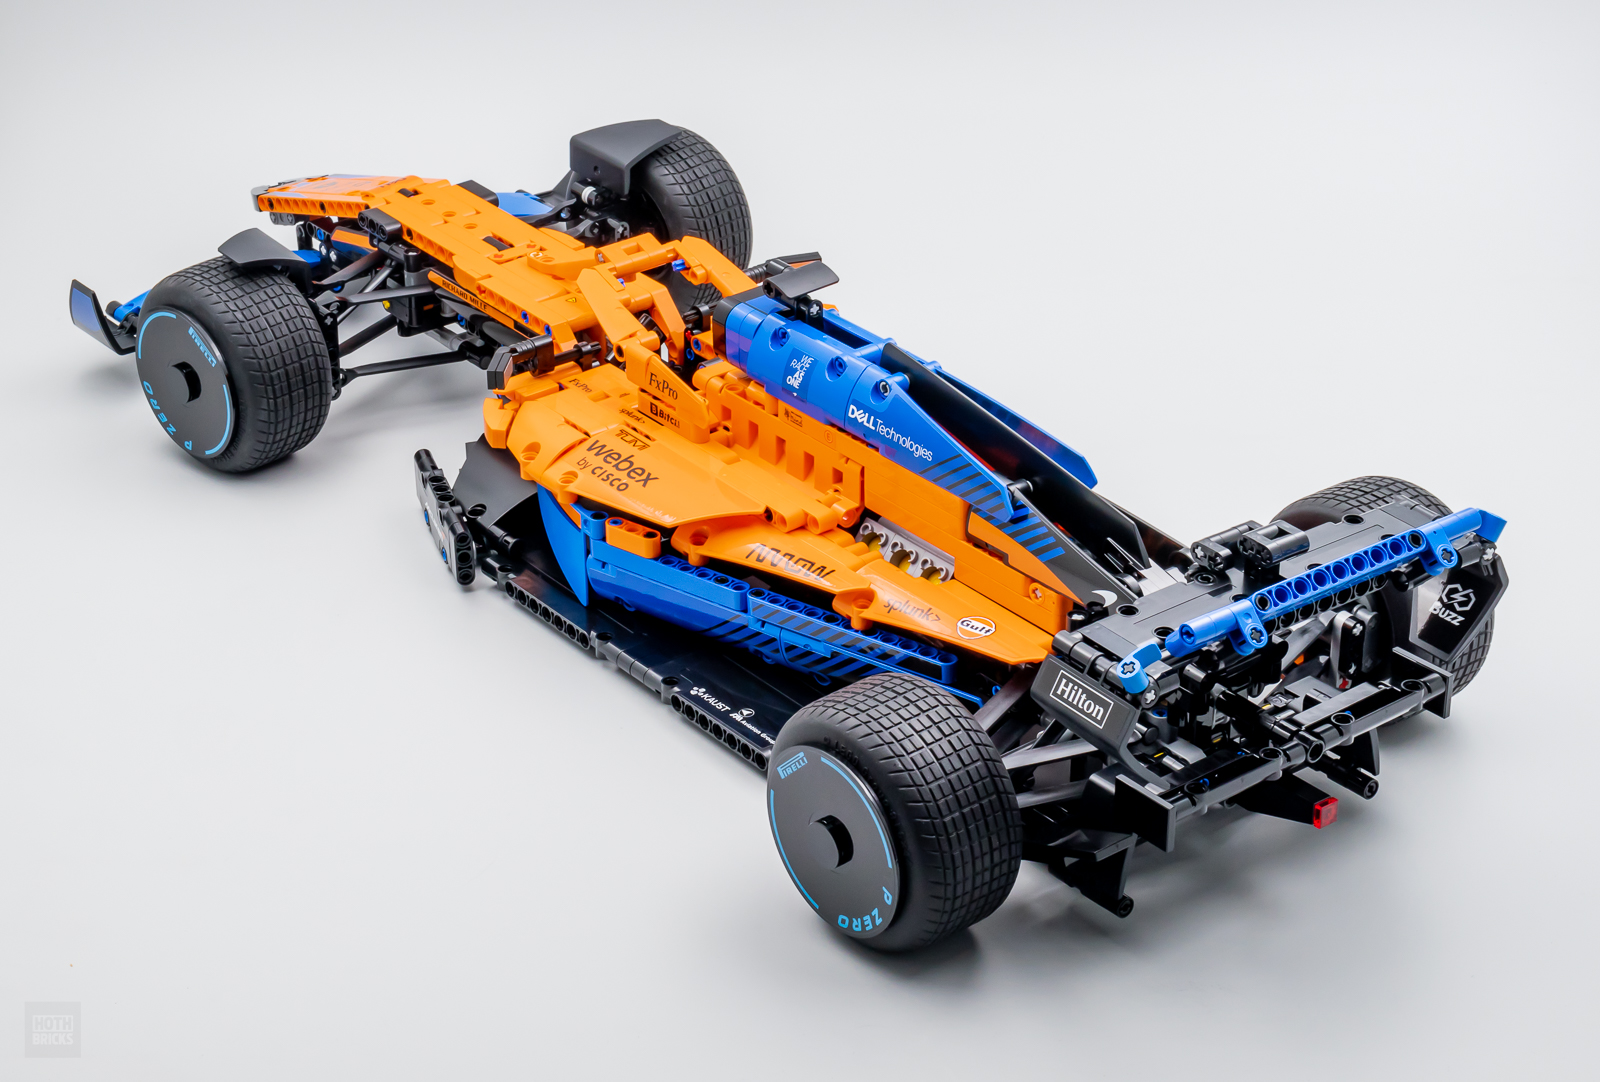 Lego McLaren F1 review: The pinnacle of motorsport and Lego